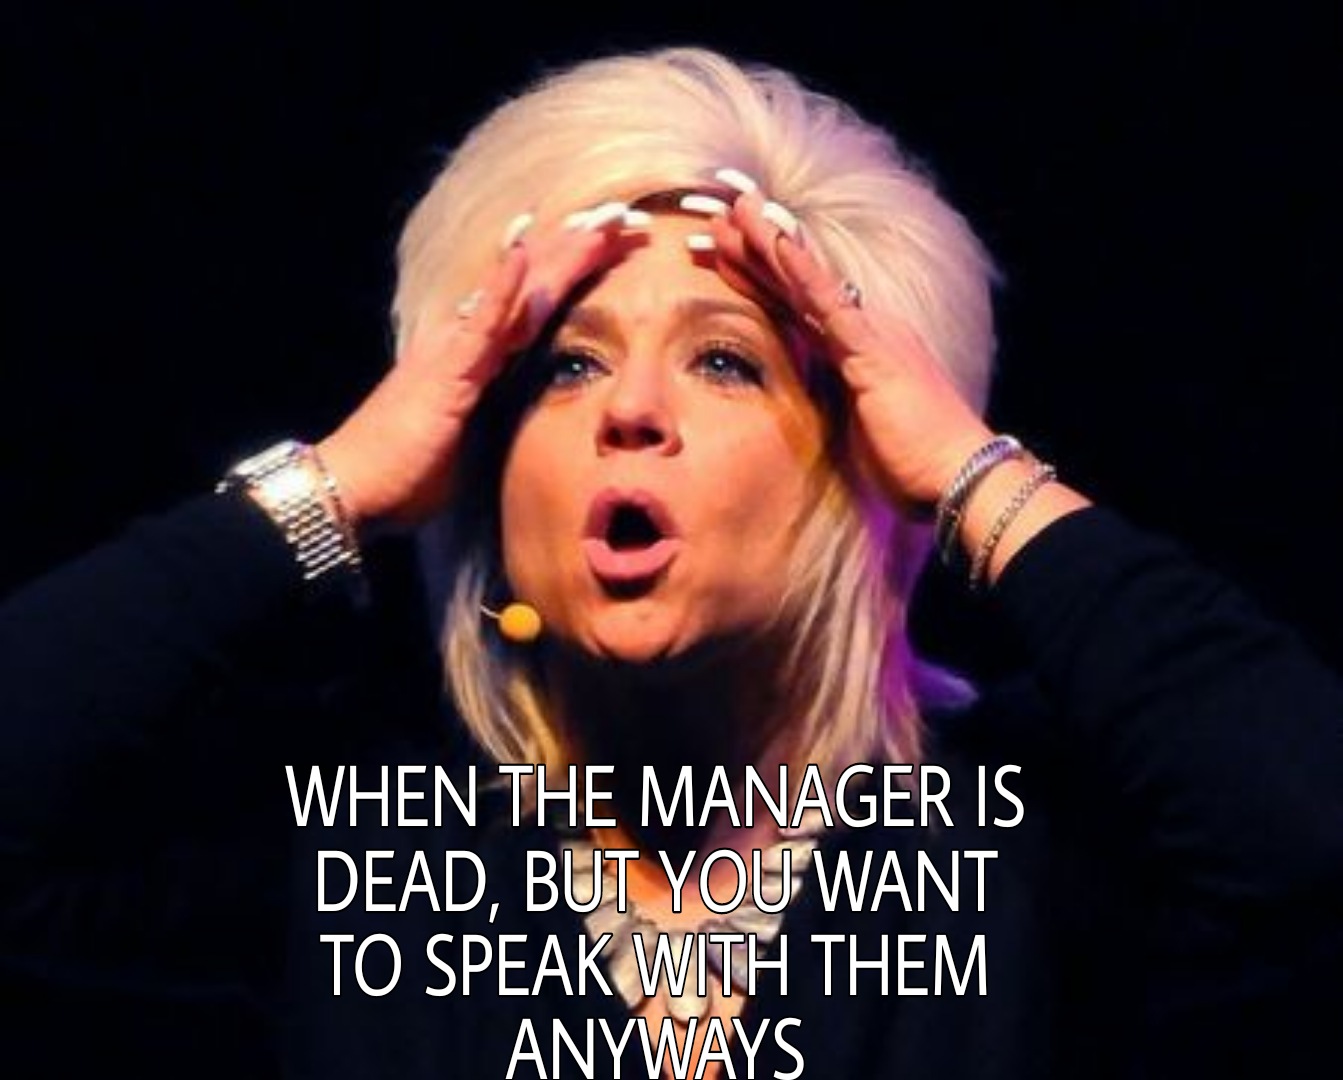 meme medium - When The Manager Is Dead, But You Want To Speak With Them Anyways